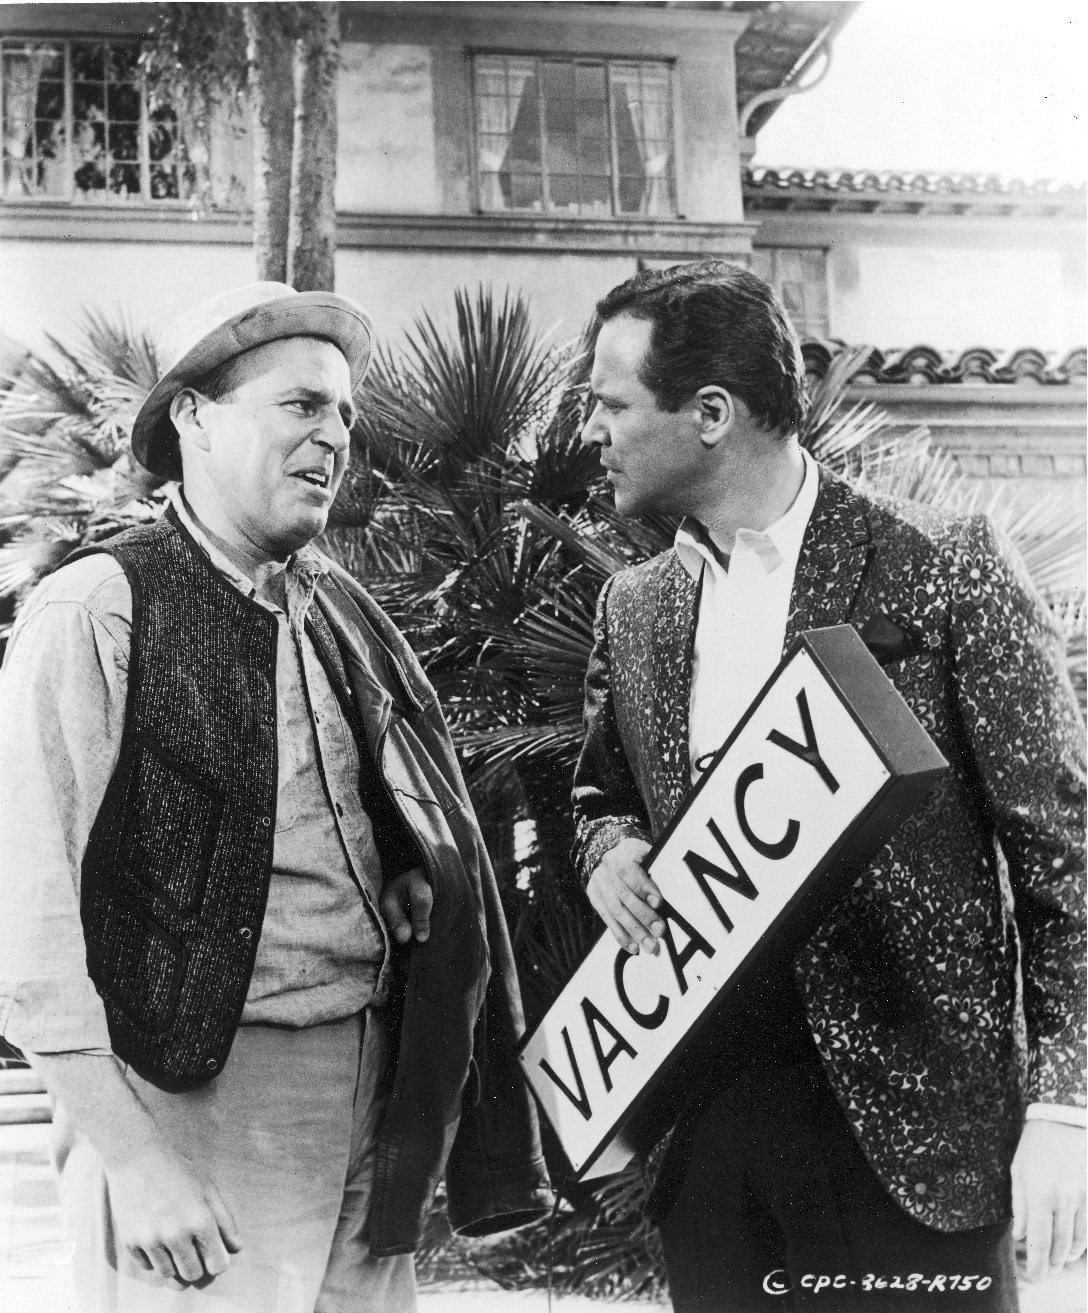 Still of Jack Lemmon and Paul Lynde in Under the Yum Yum Tree (1963)